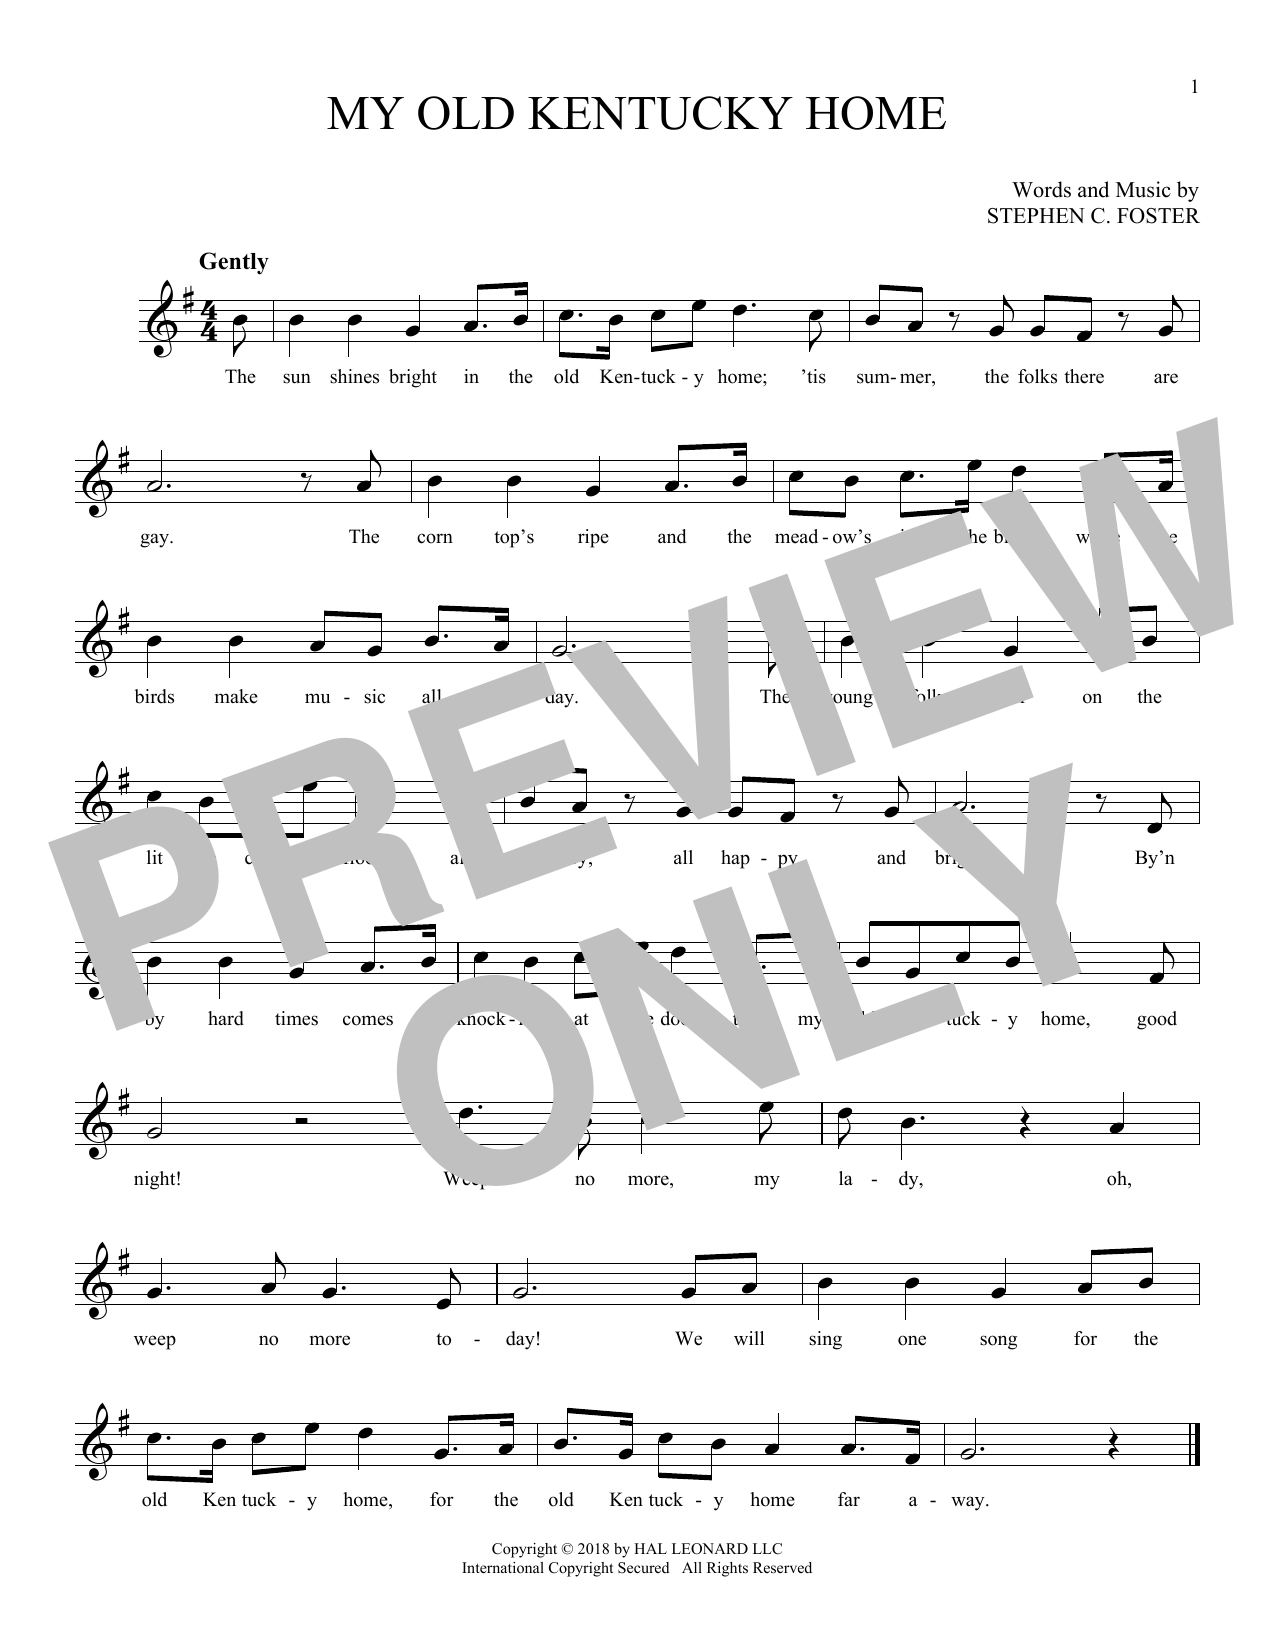 Stephen C Foster My Old Kentucky Home Sheet Music Notes Download Printable Pdf Score 187469 